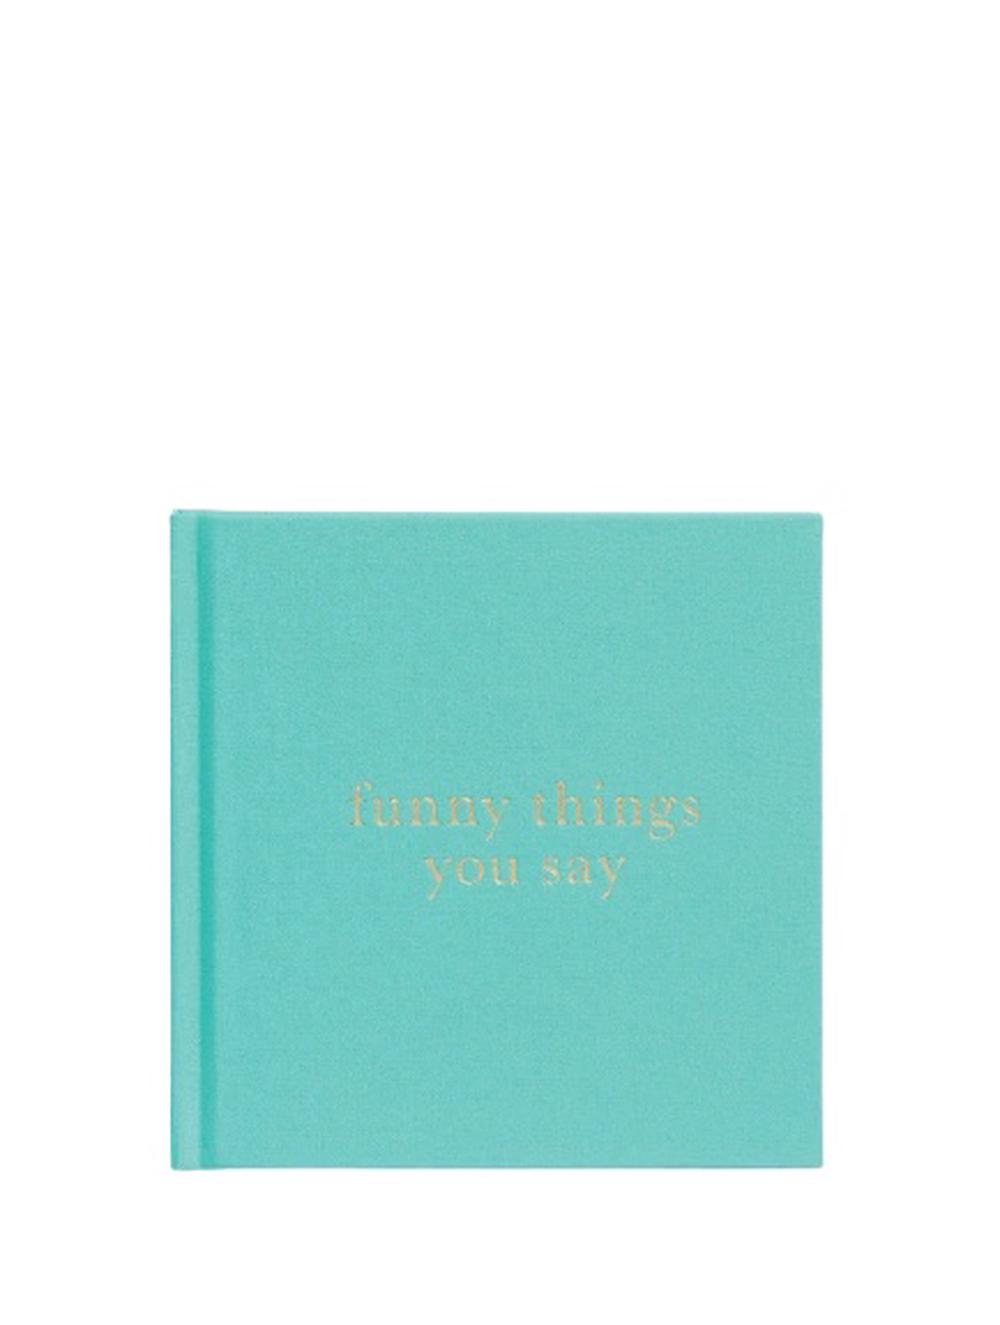 Write To Me - Funny Things You Say. (Mint), Hardcover, 0793618539269 | Buy  online at Tiny Fox